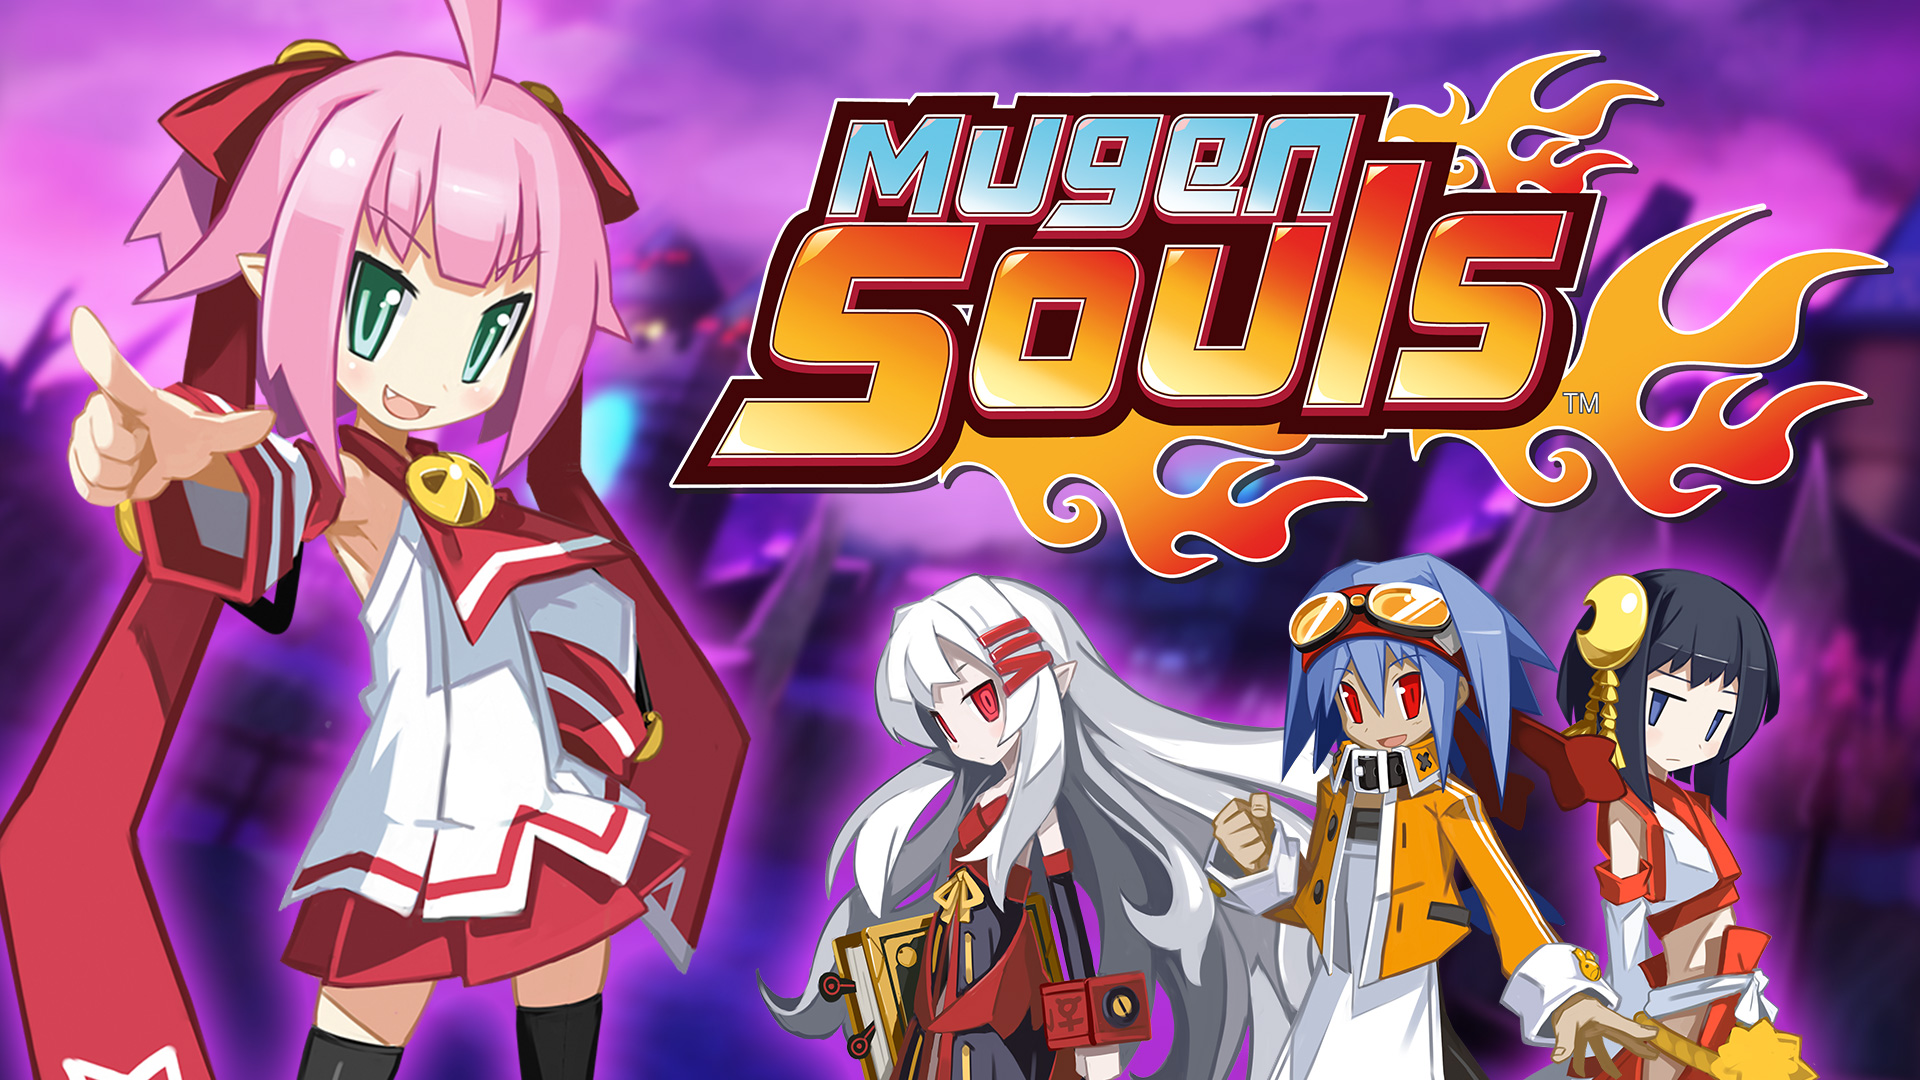 Mugen Souls is getting a Switch port in spring 2023